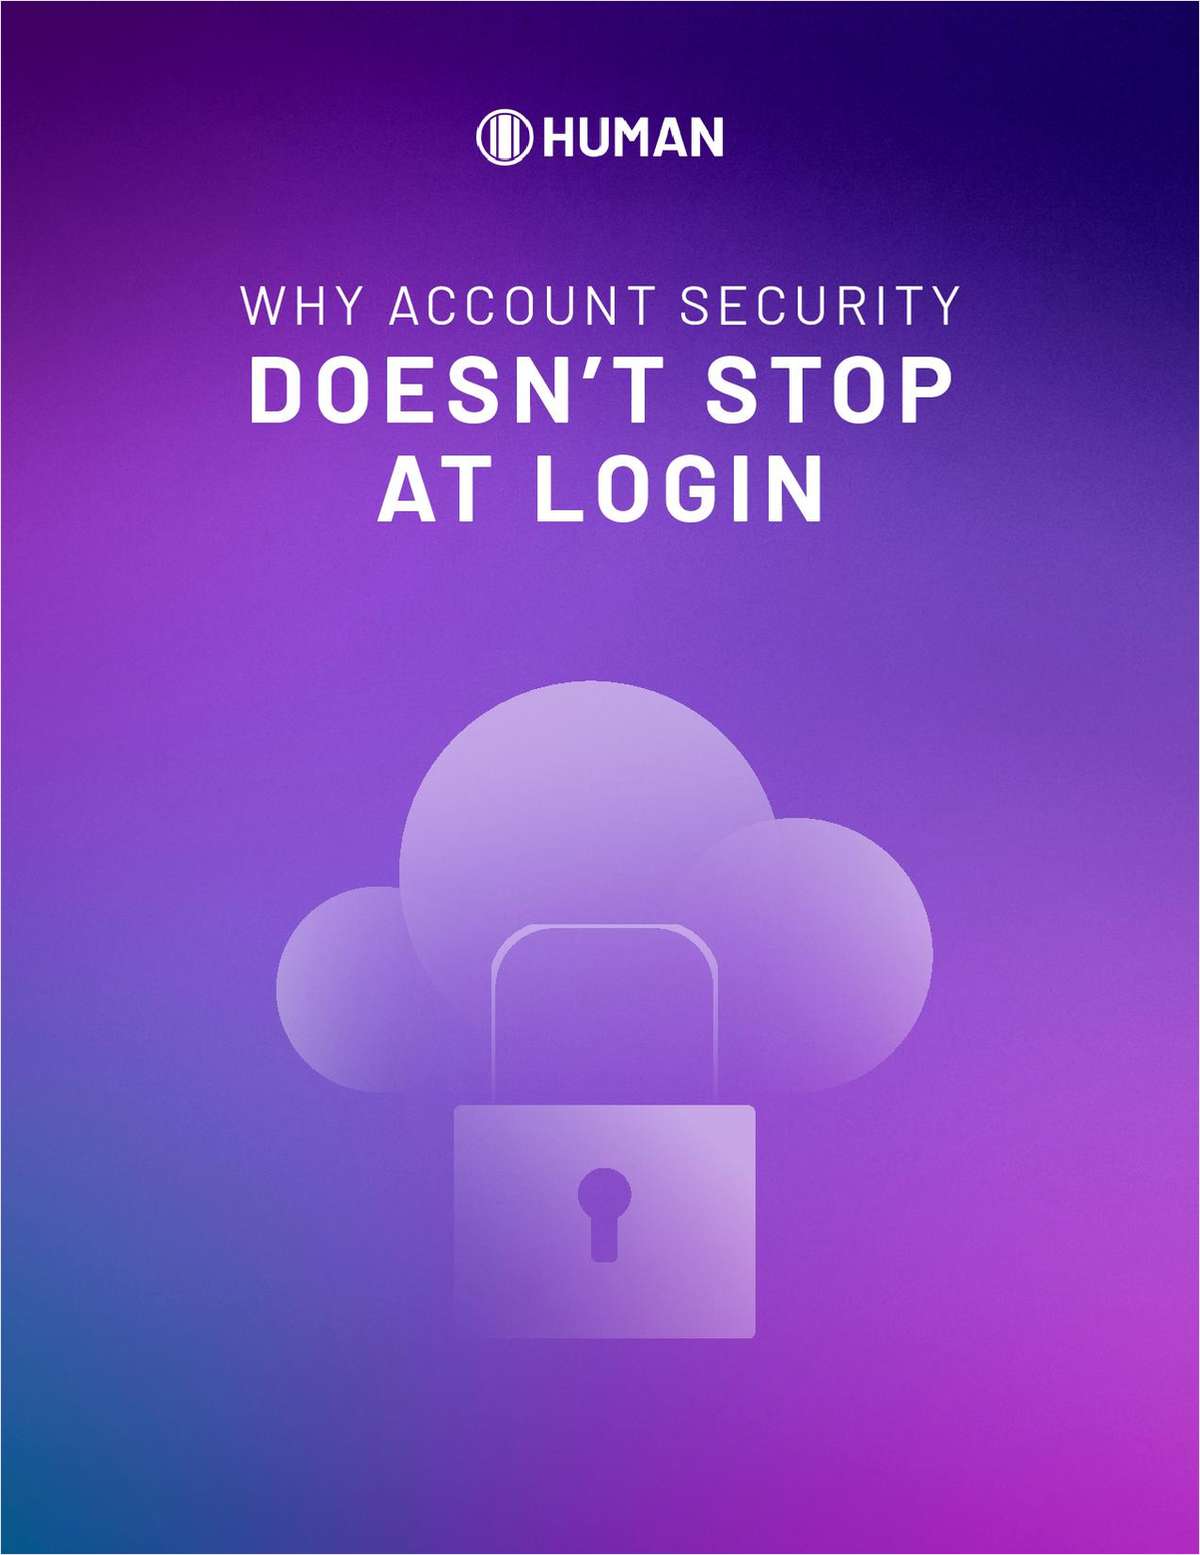 Why Account Security Doesn't Stop at Login